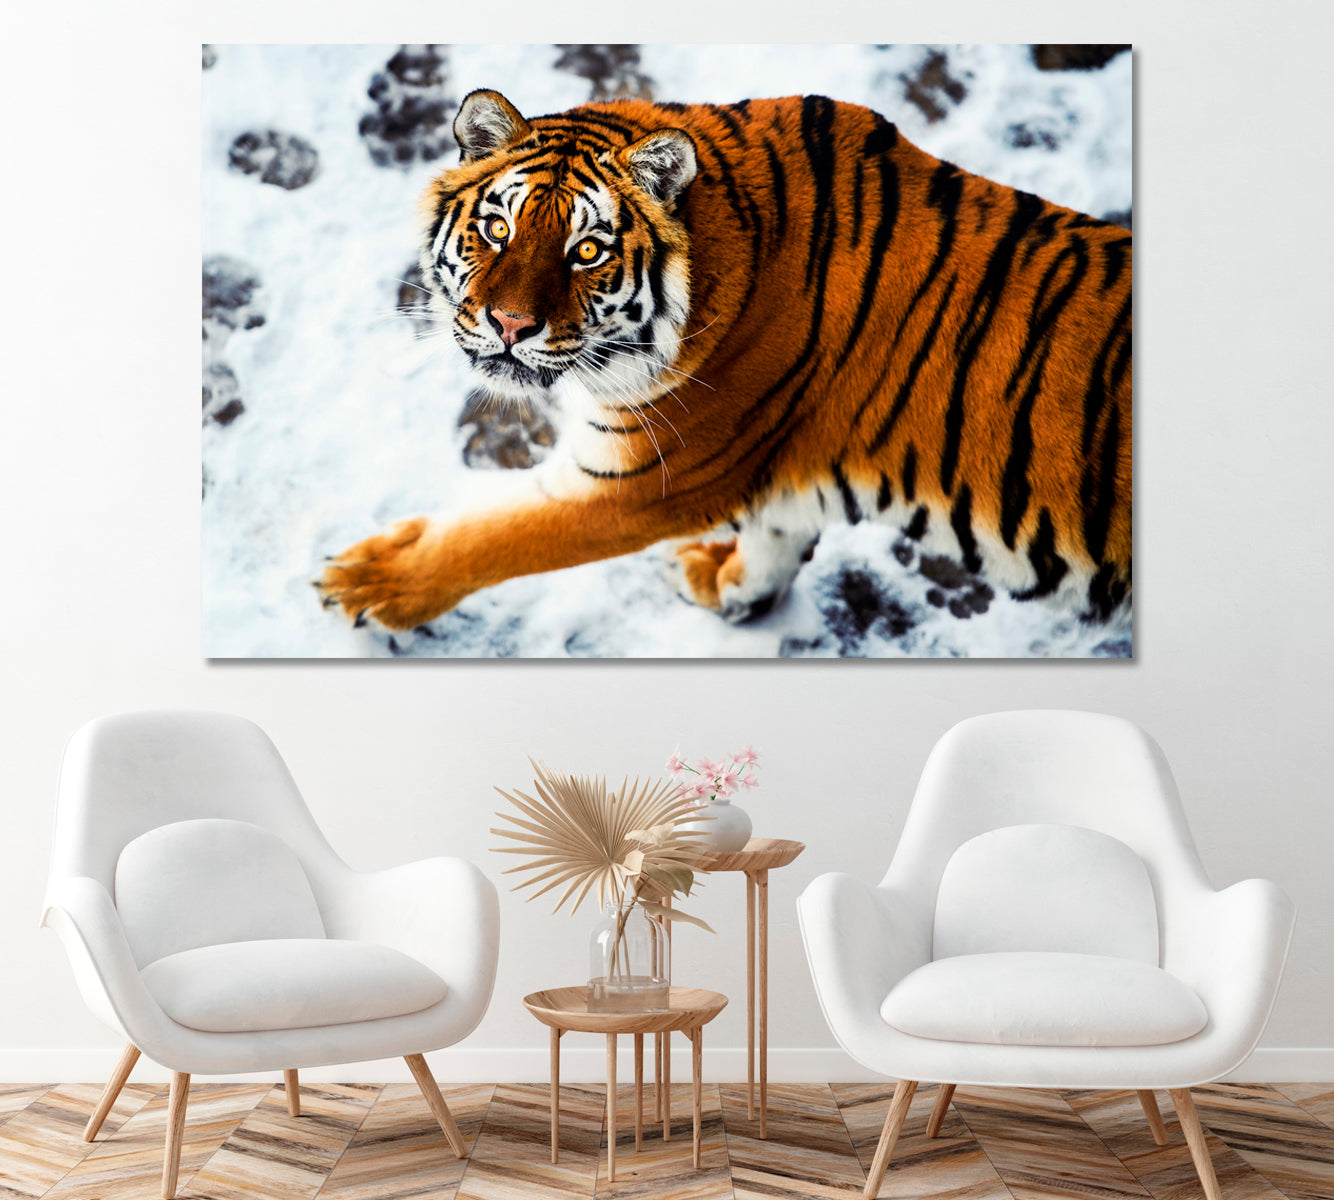 Amur Tiger with Footprints in Snow Canvas Print ArtLexy 1 Panel 24"x16" inches 